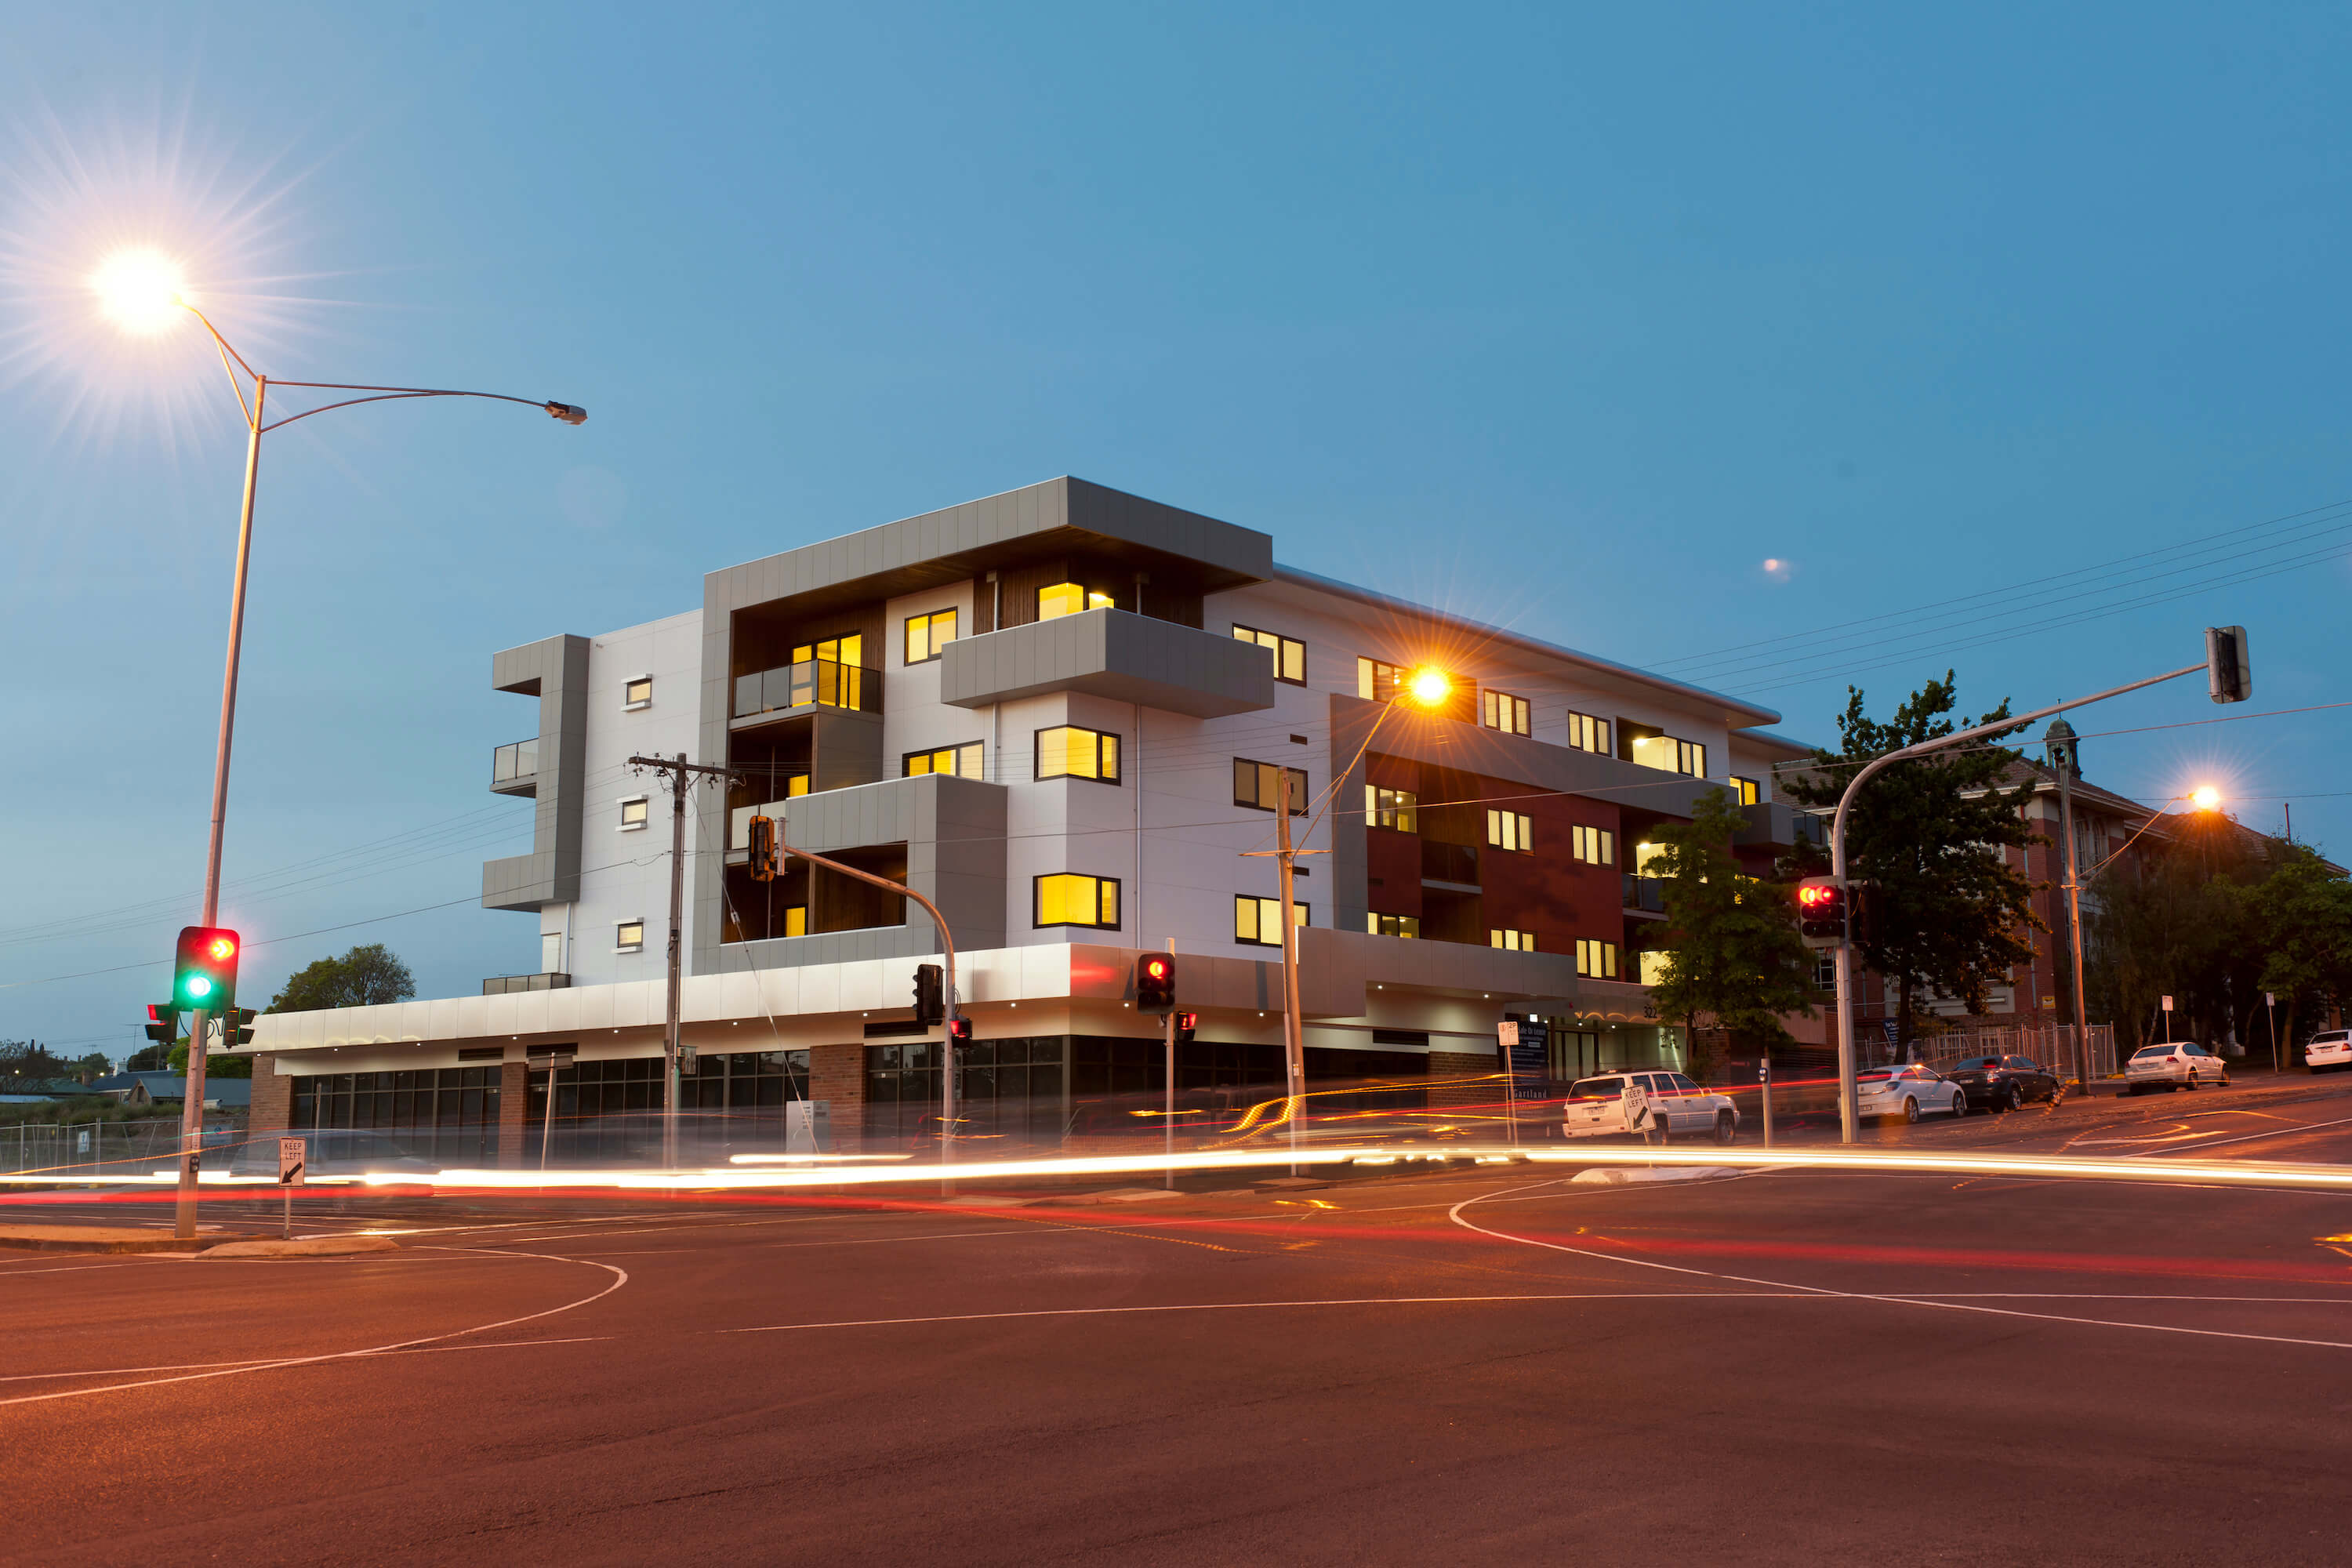 Night view of mixed use apartment building, traffic lights and traffic in long exposure photo